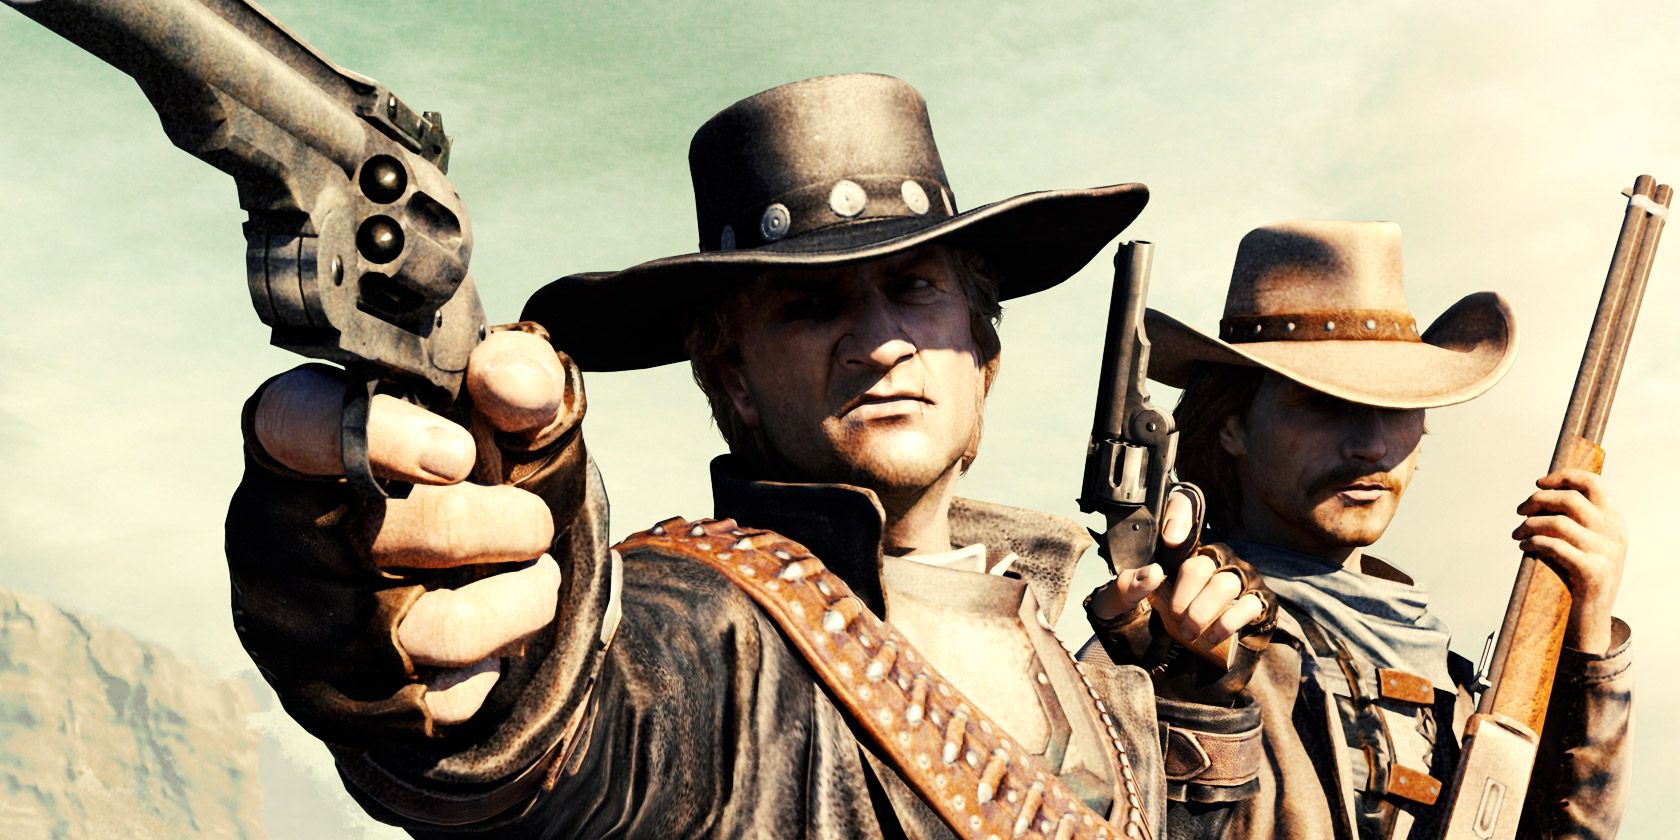 If you want to inject a serving of the Wild West into your gaming sessions